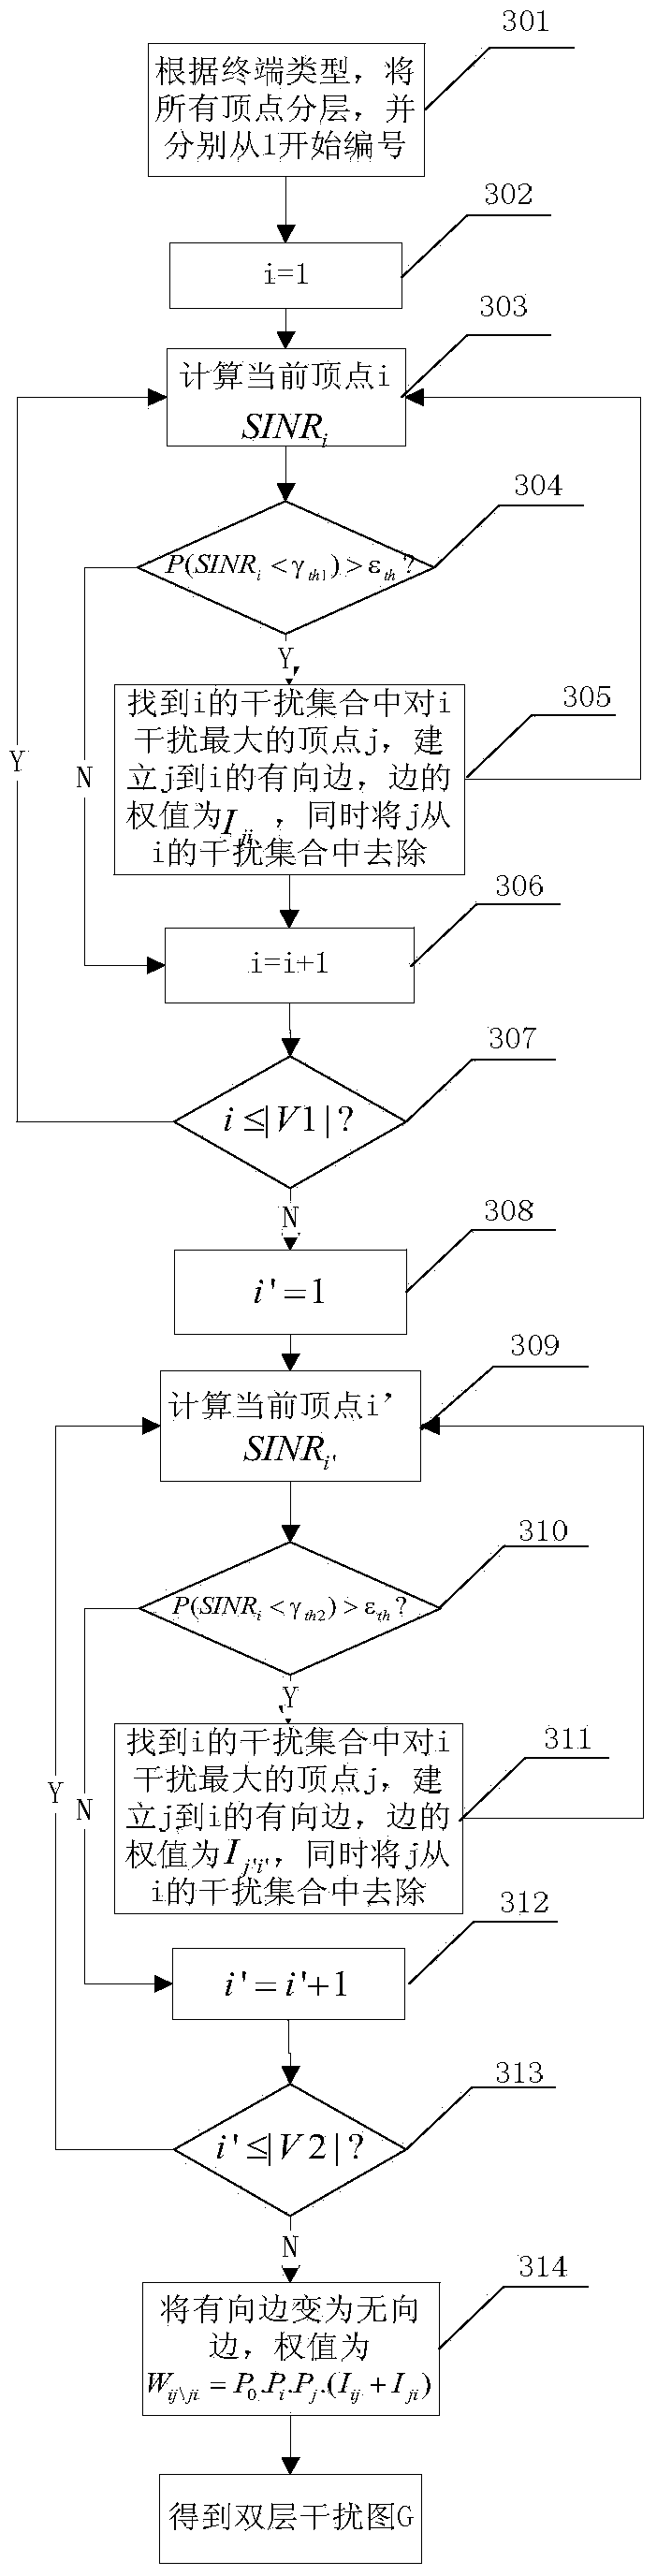 Channel resource coloring and distribution method based on double-layer interference graph